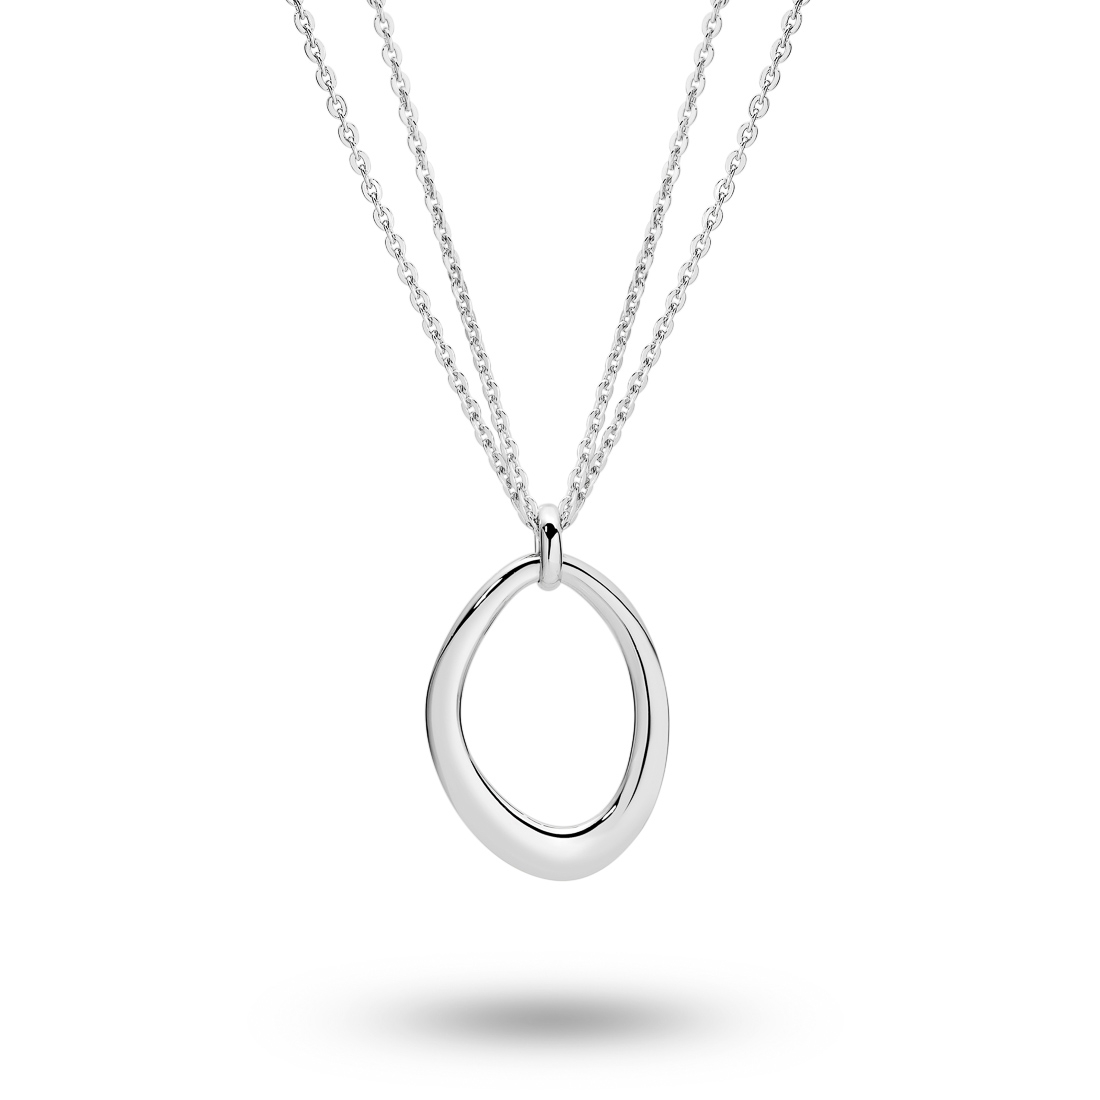 Winter Silver Oval Necklace